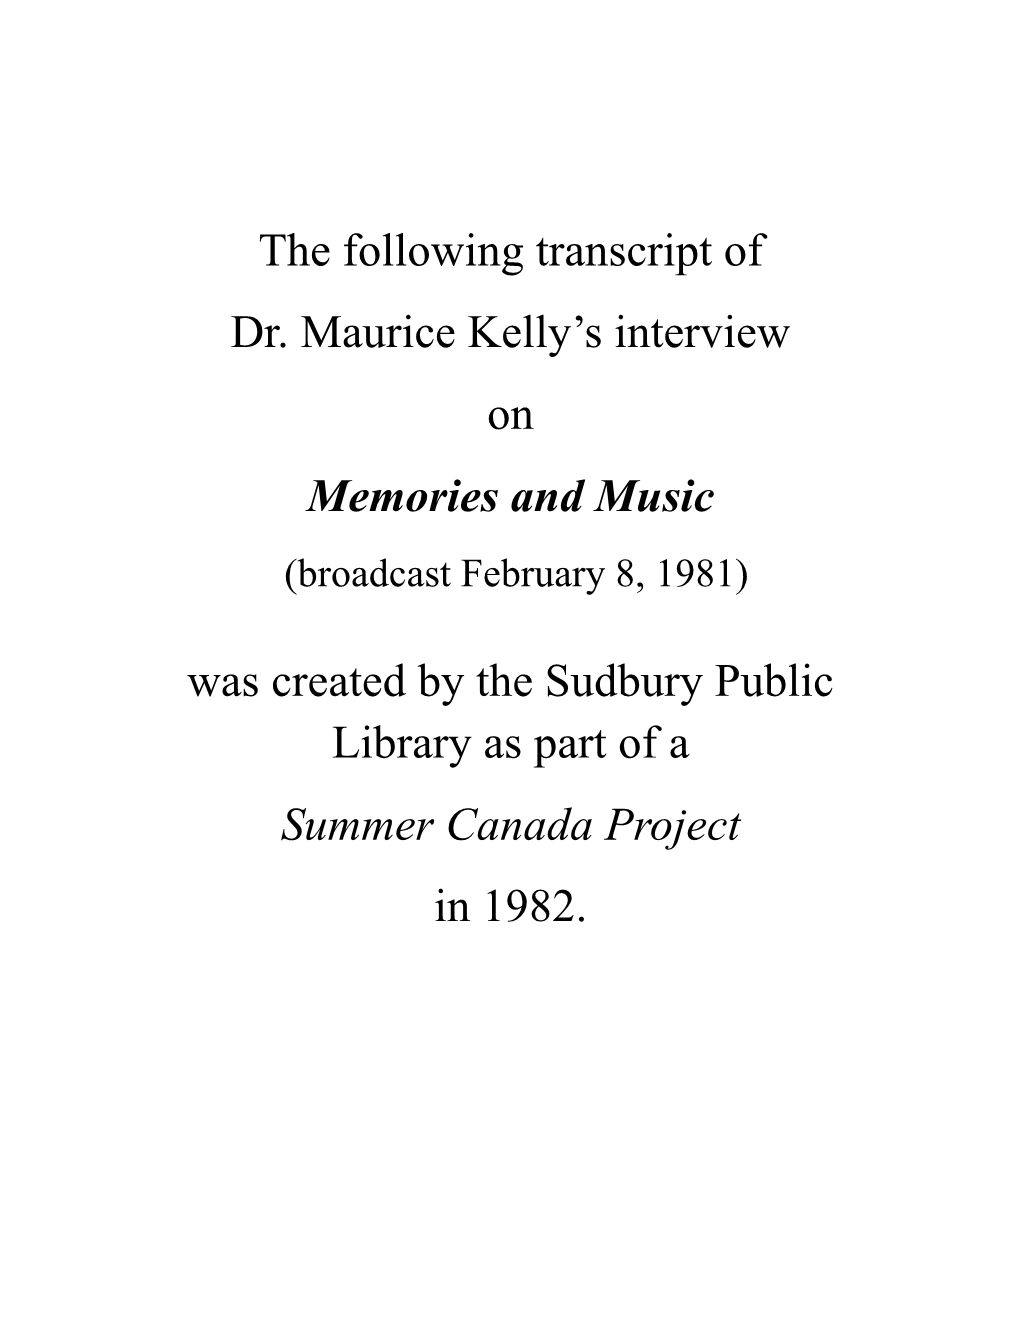 The Following Transcript of Dr. Maurice Kelly's Interview on Memories And